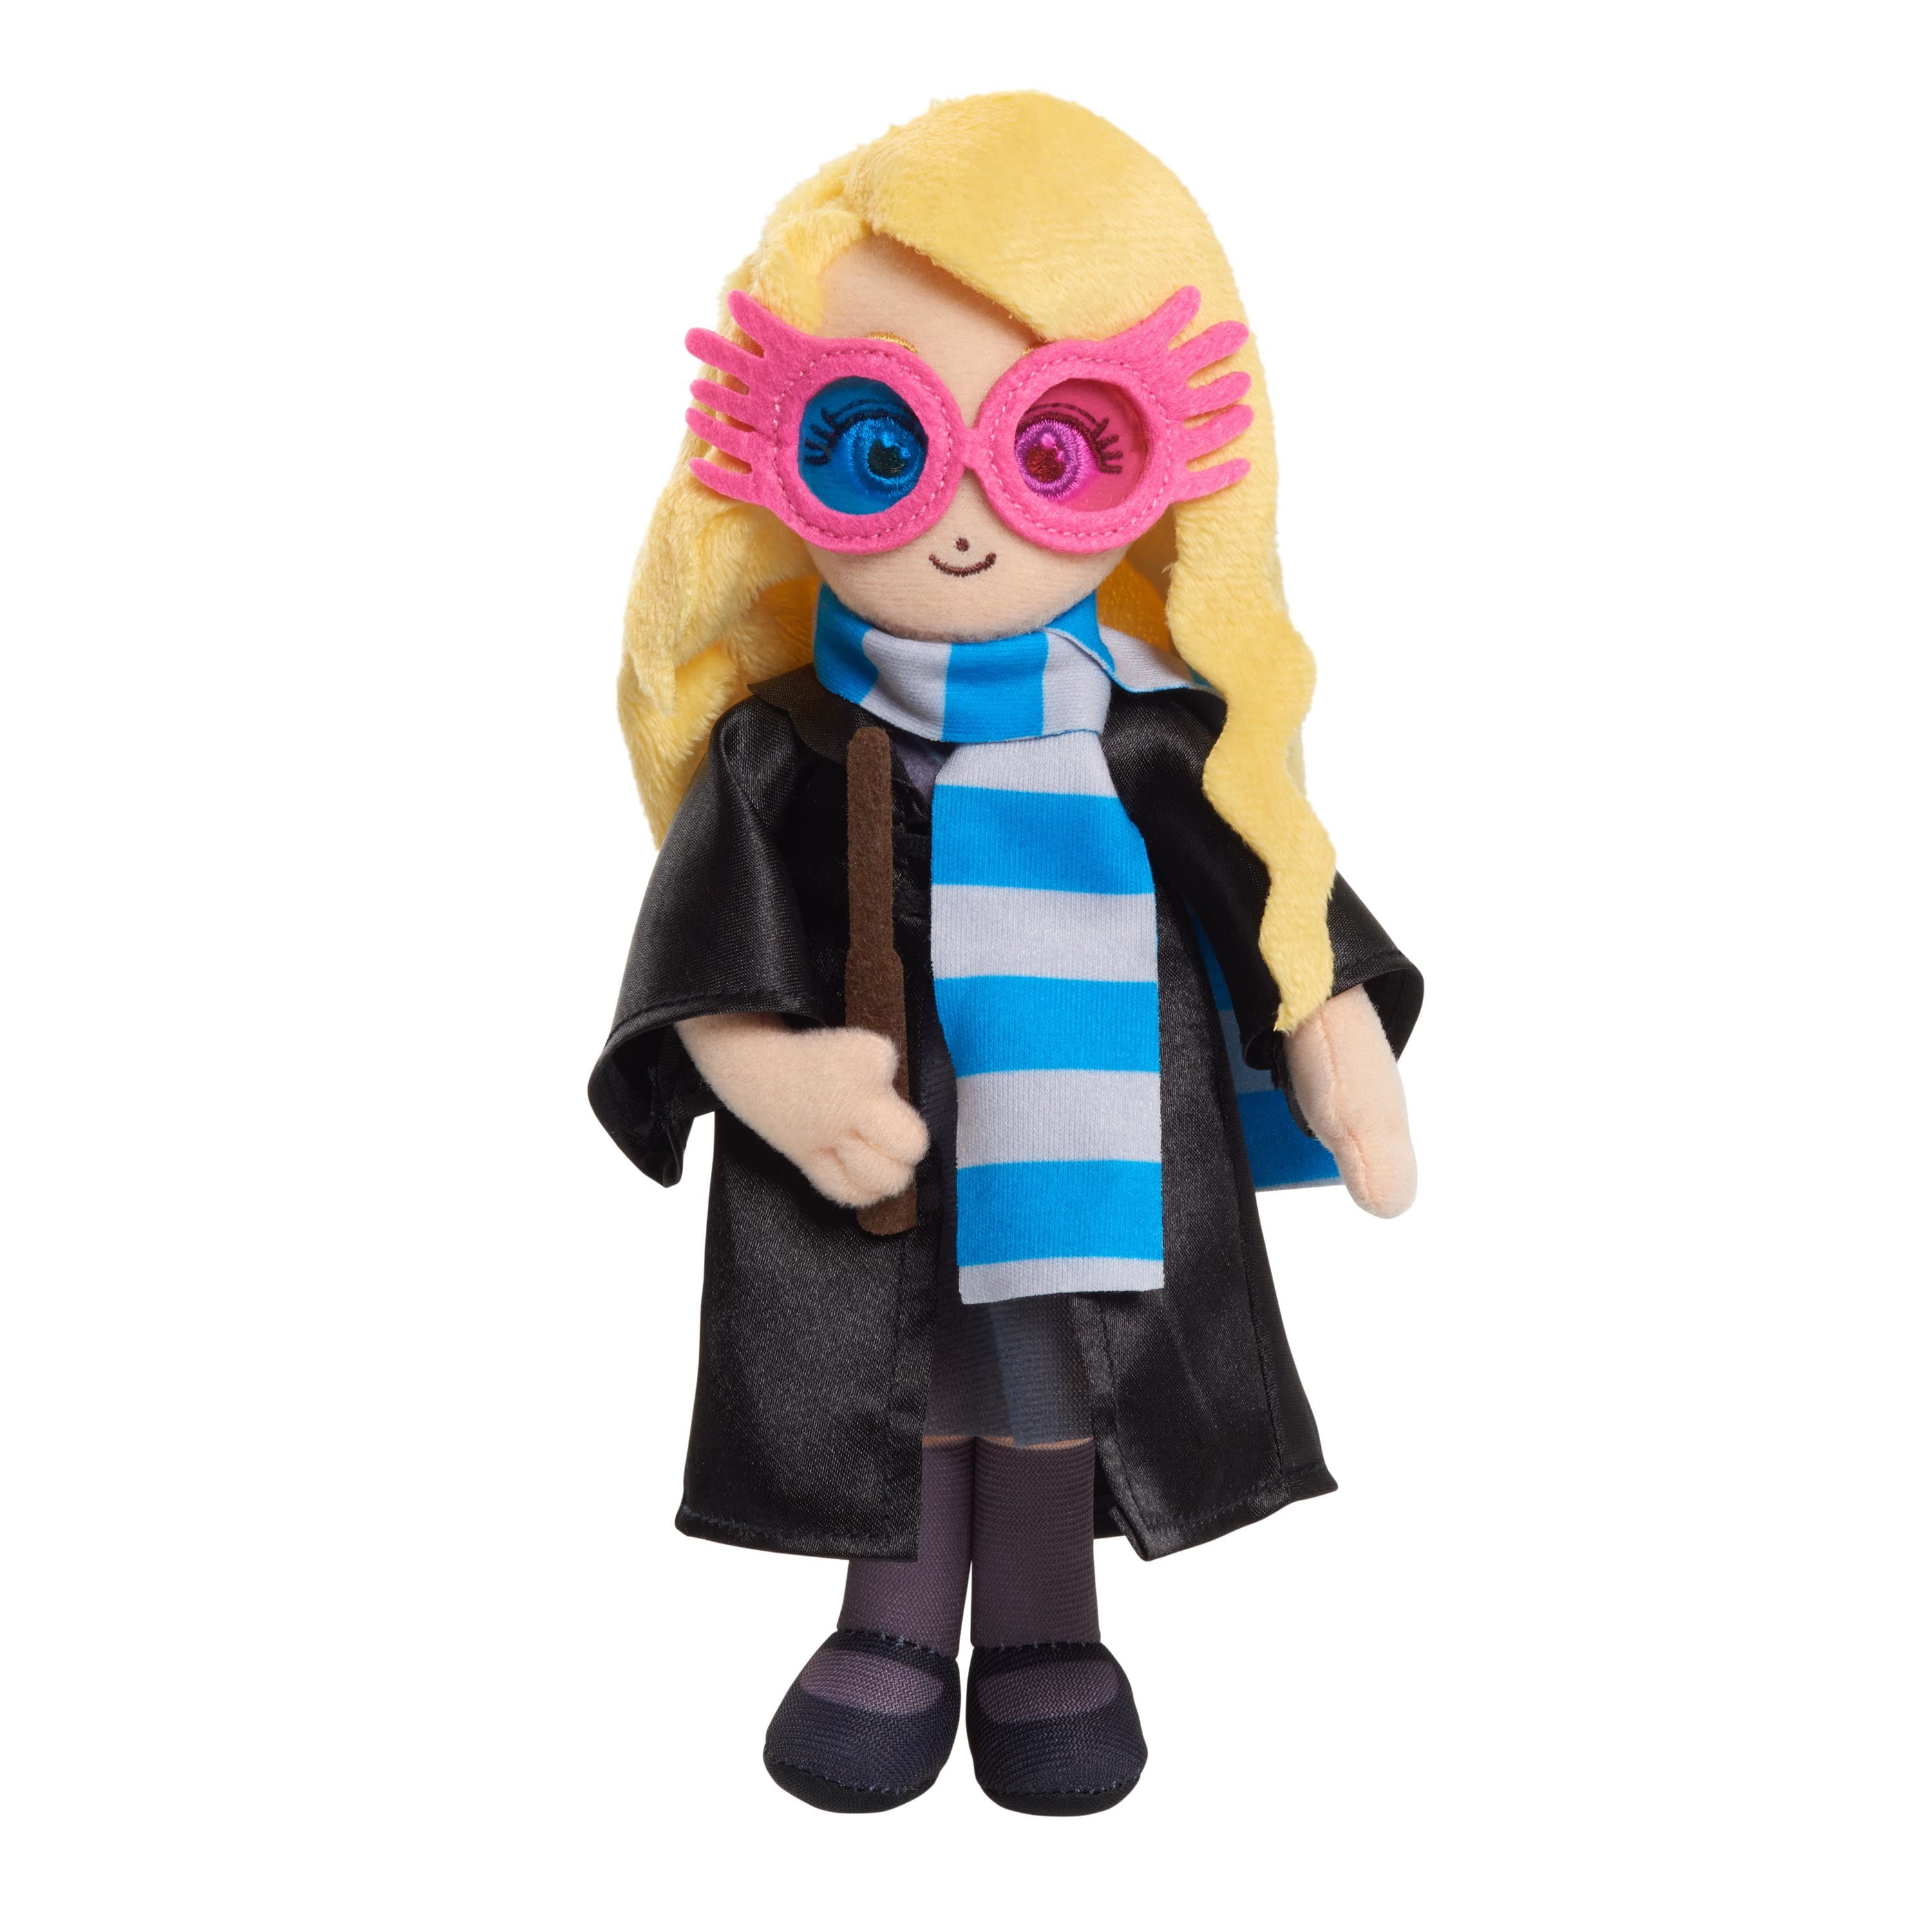 Harry Potter™ 8-Inch Spell Casting Wizards Harry Potter™ Small Plush with Sound Effects by Just Play 